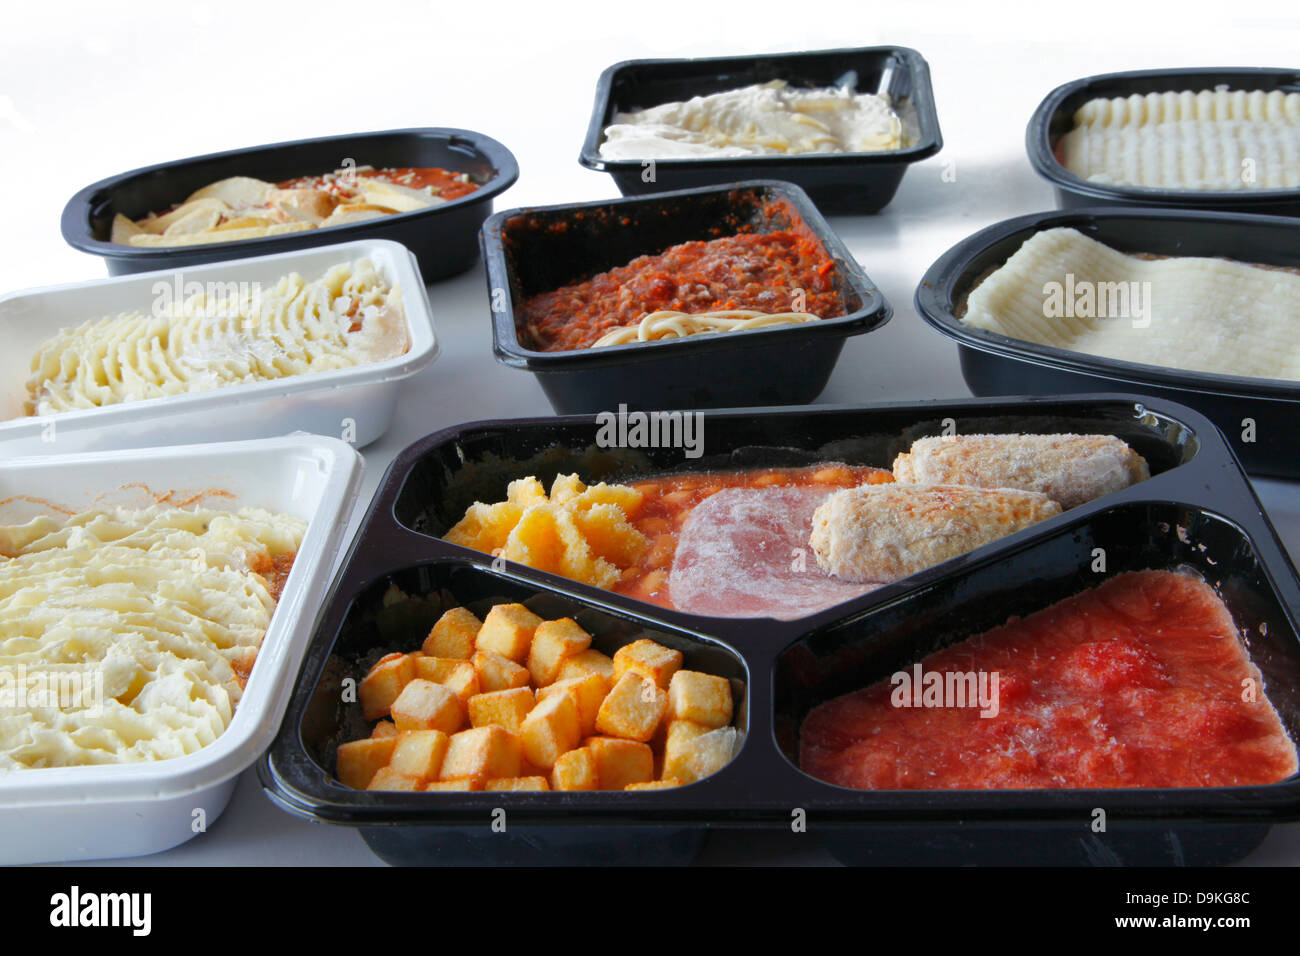 Common ready meals or TV dinners Stock Photo